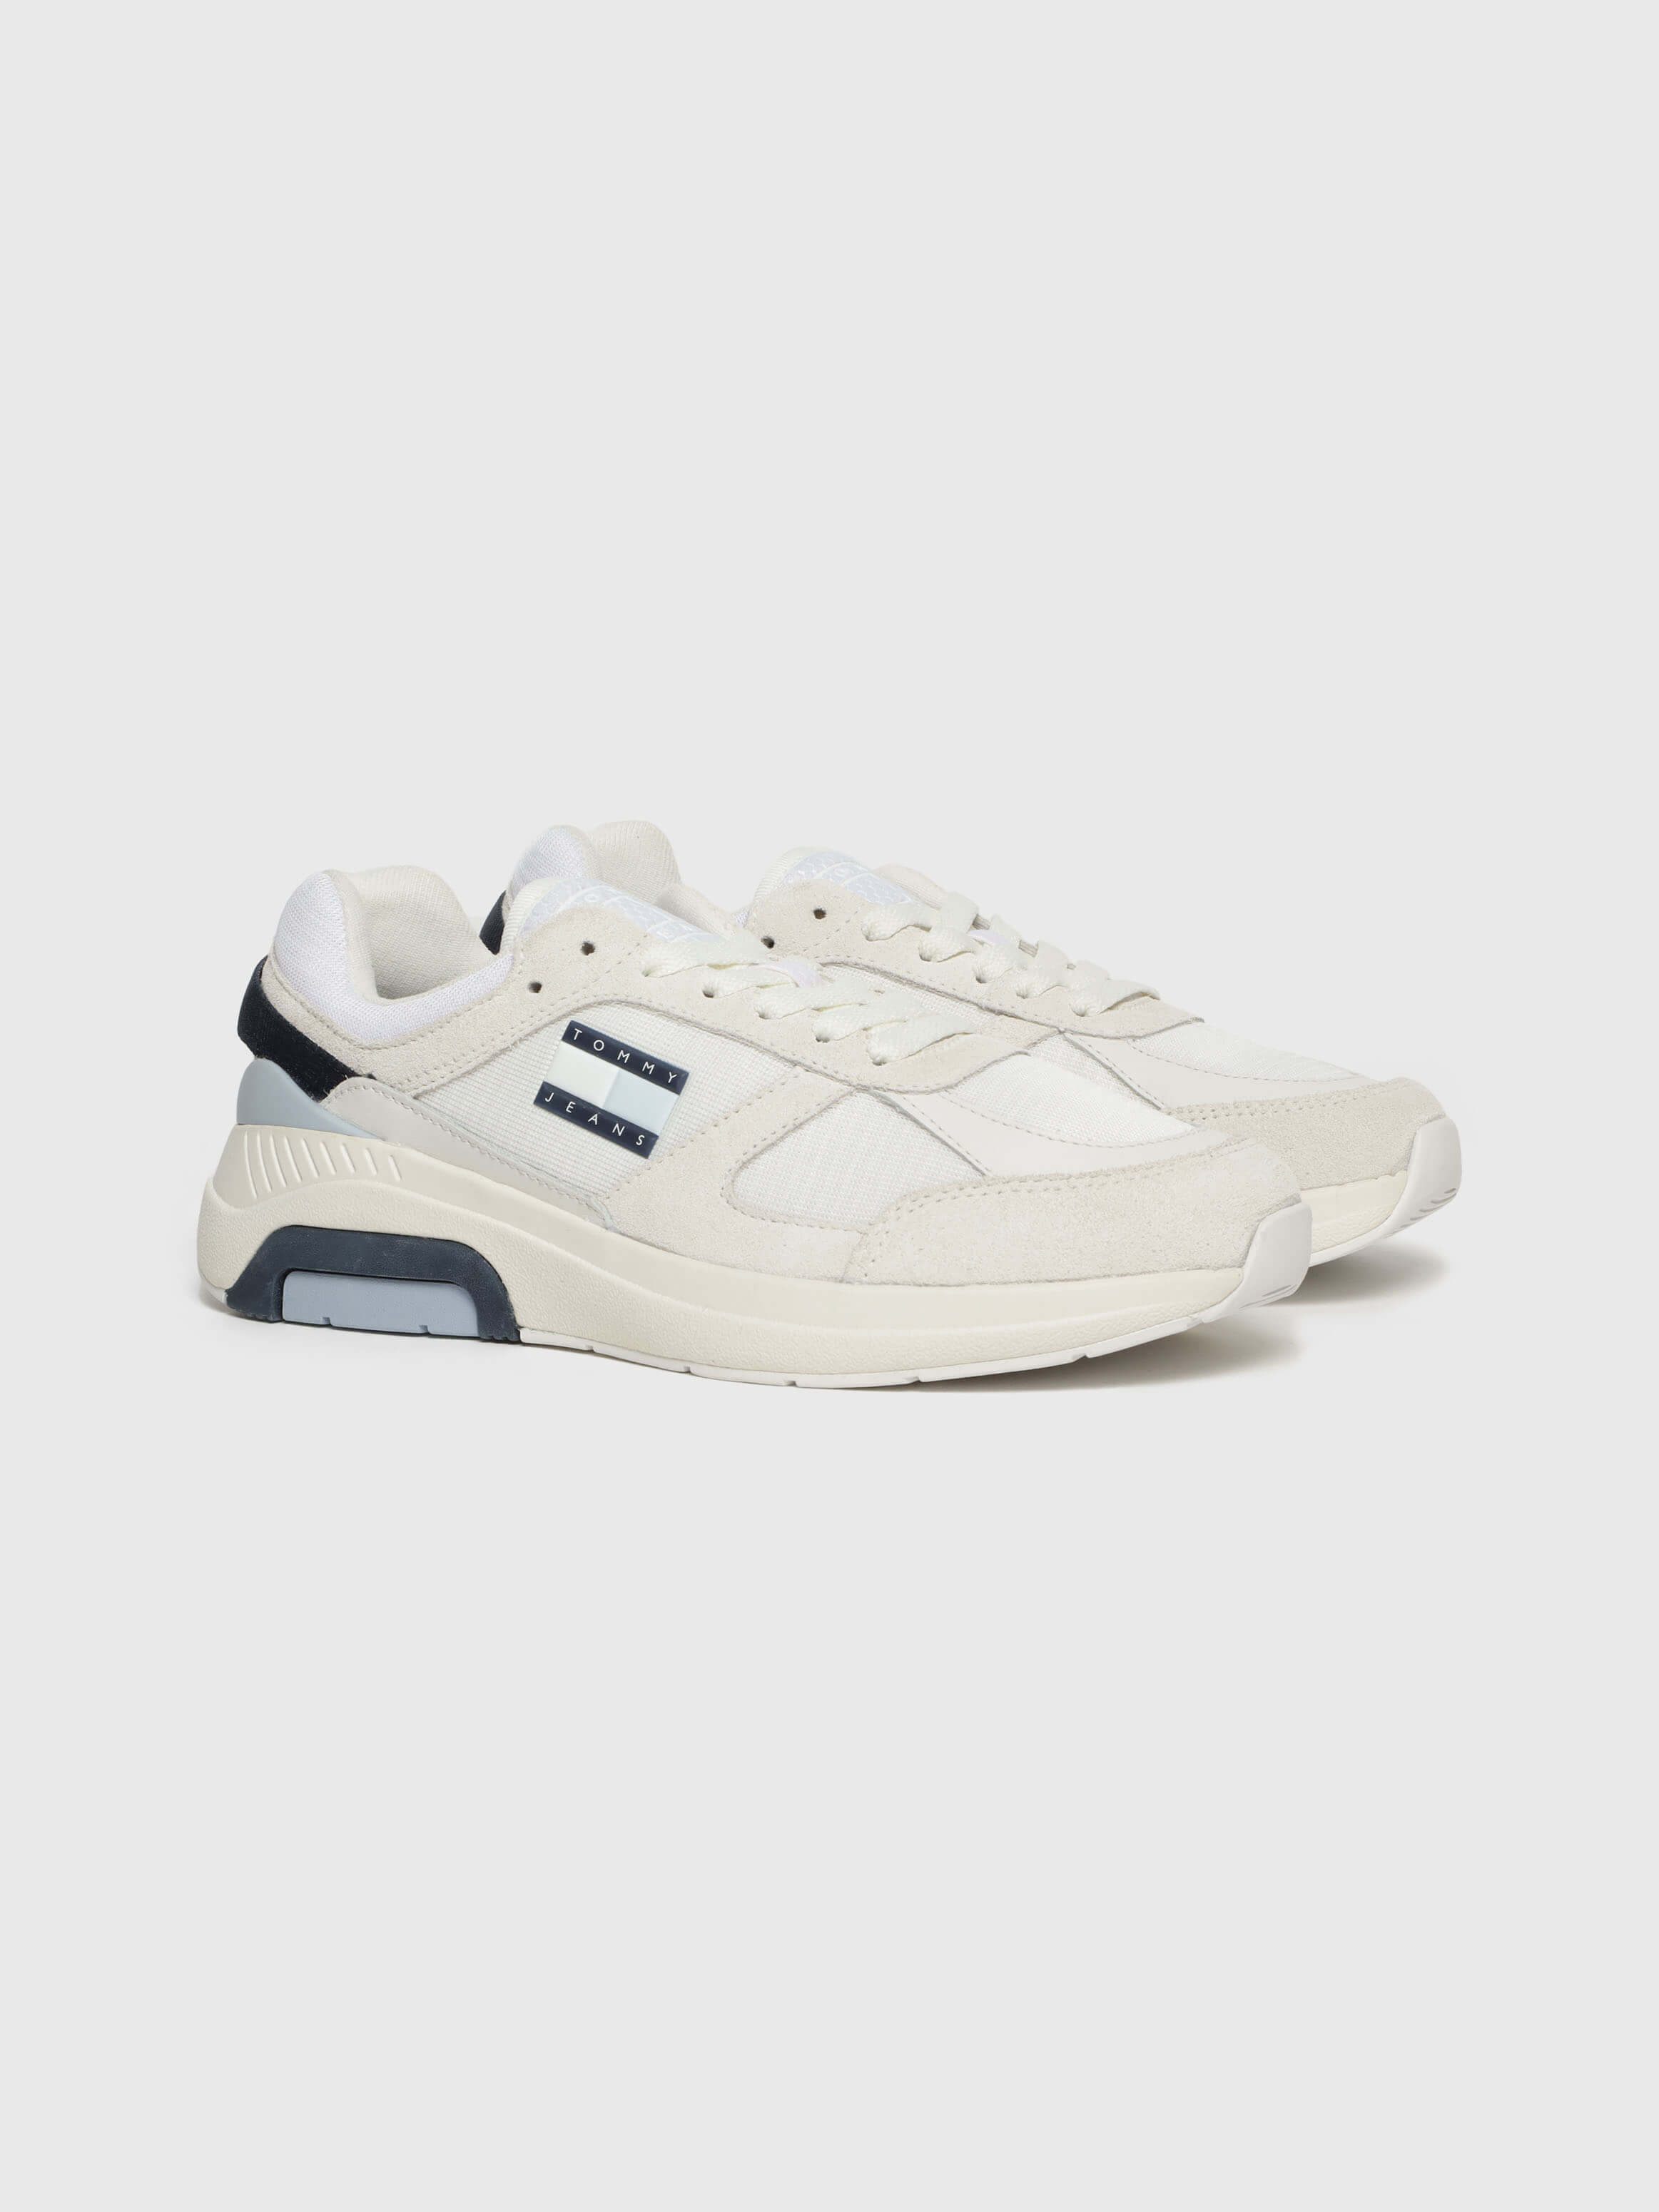 Tenis Tommy Hilfiger Anni10 para mujer